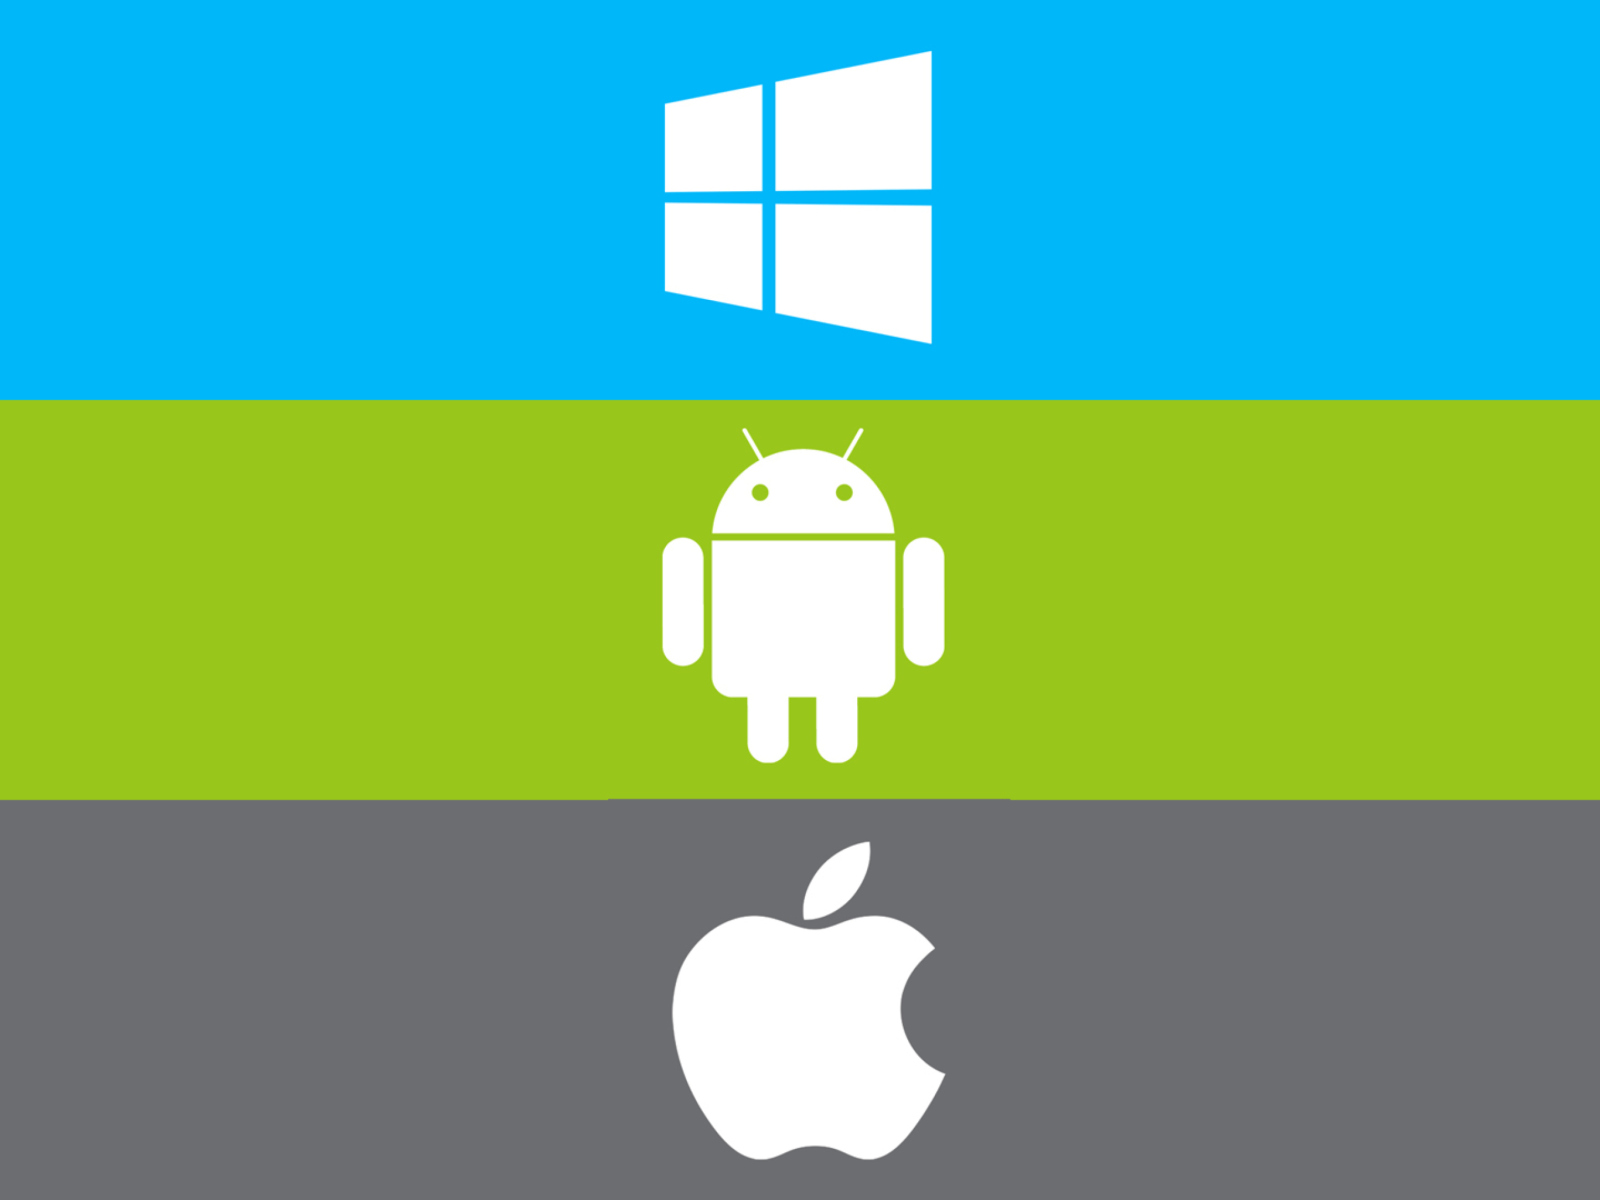 Sfondi Windows, Apple, Android - What's Your Choice? 1600x1200